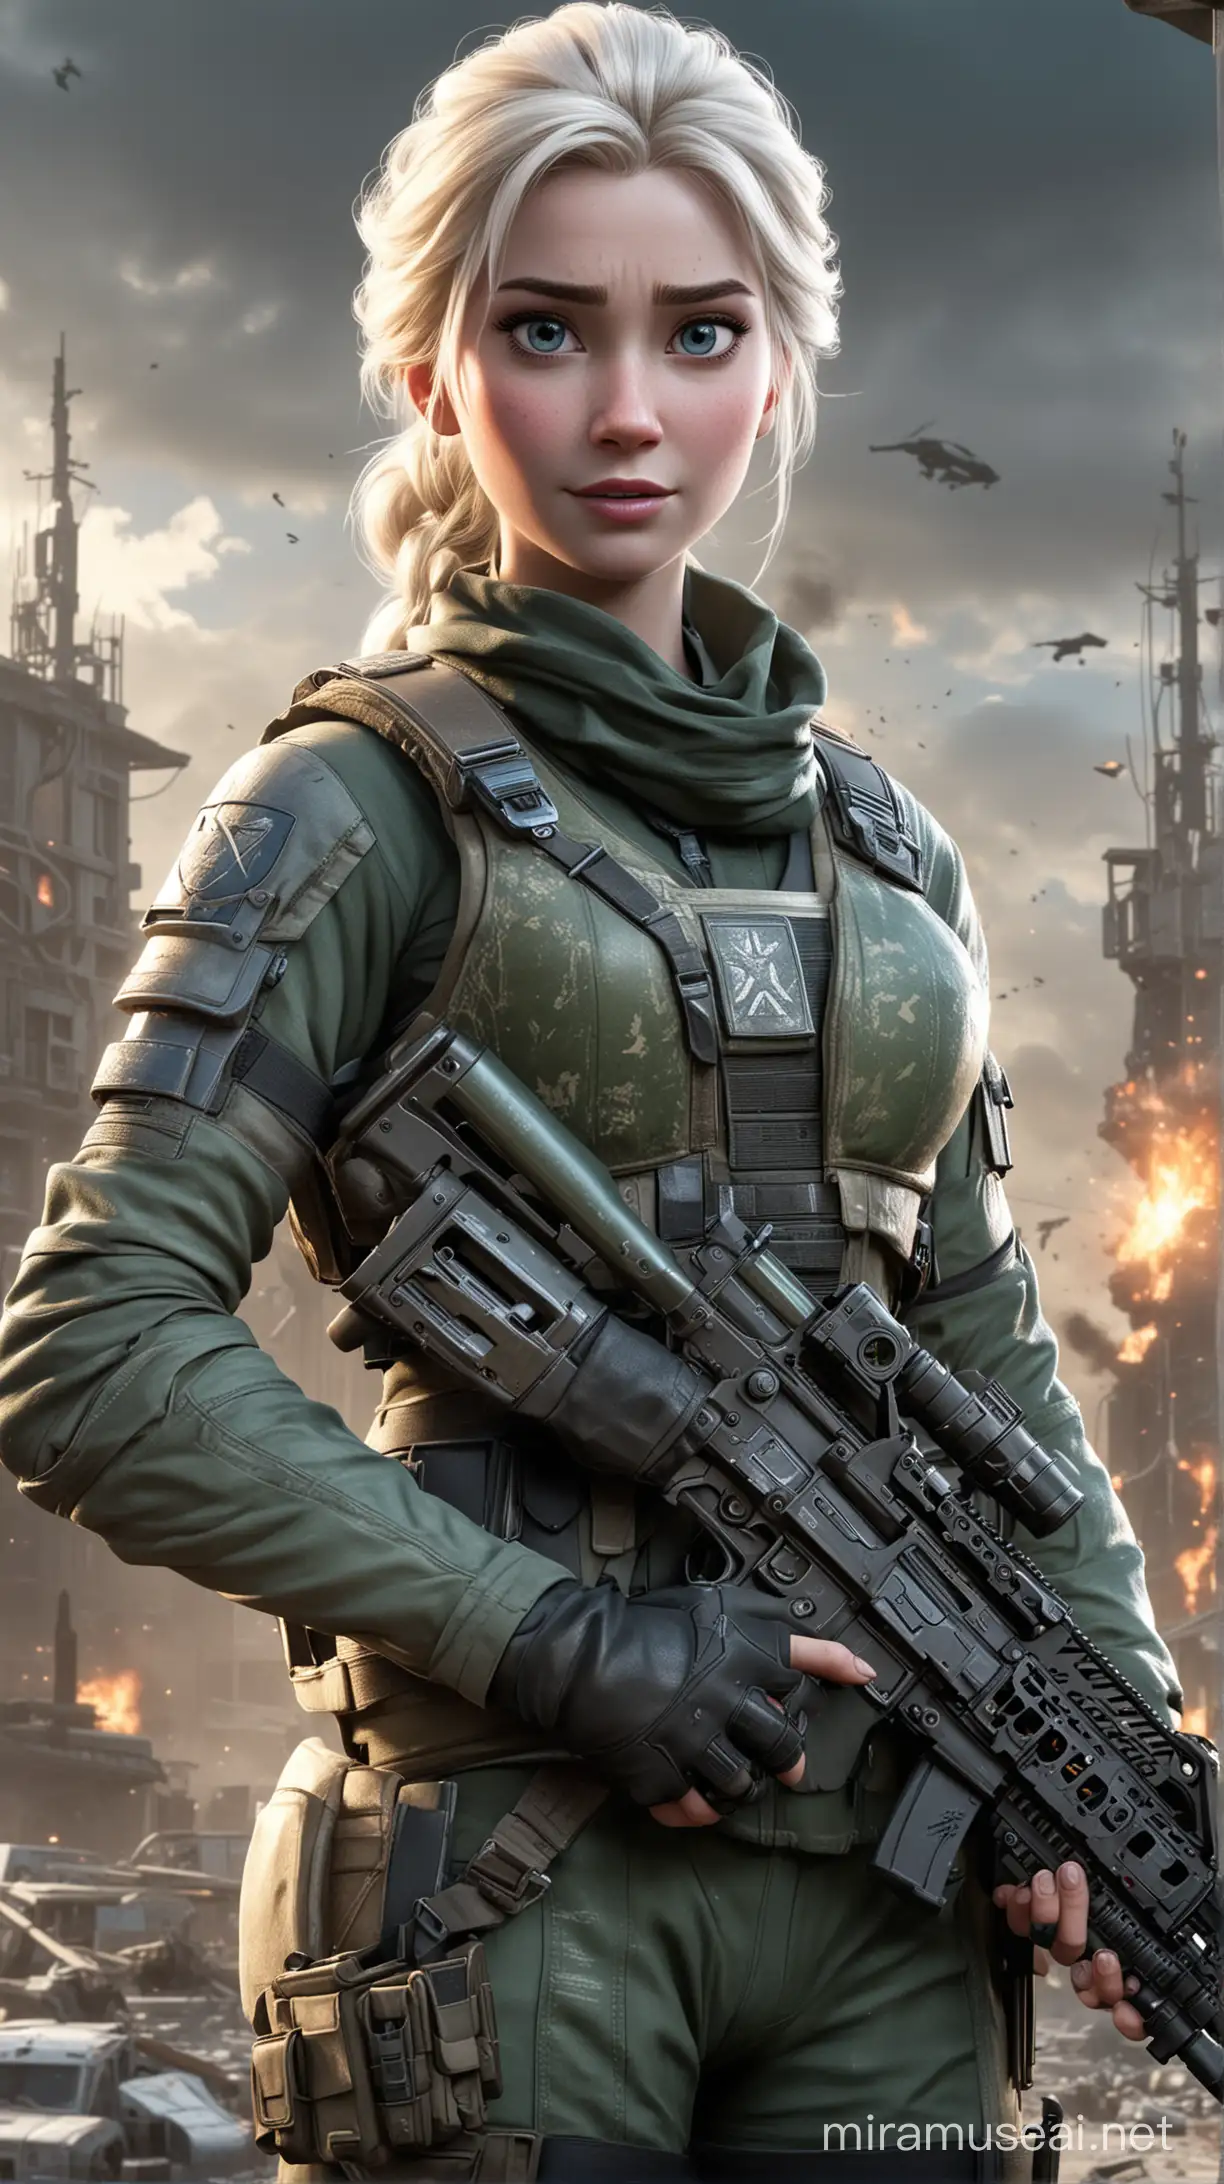 Elsa from Frozen as Call of Duty Operator Frozen Queen in Futuristic Military Gear